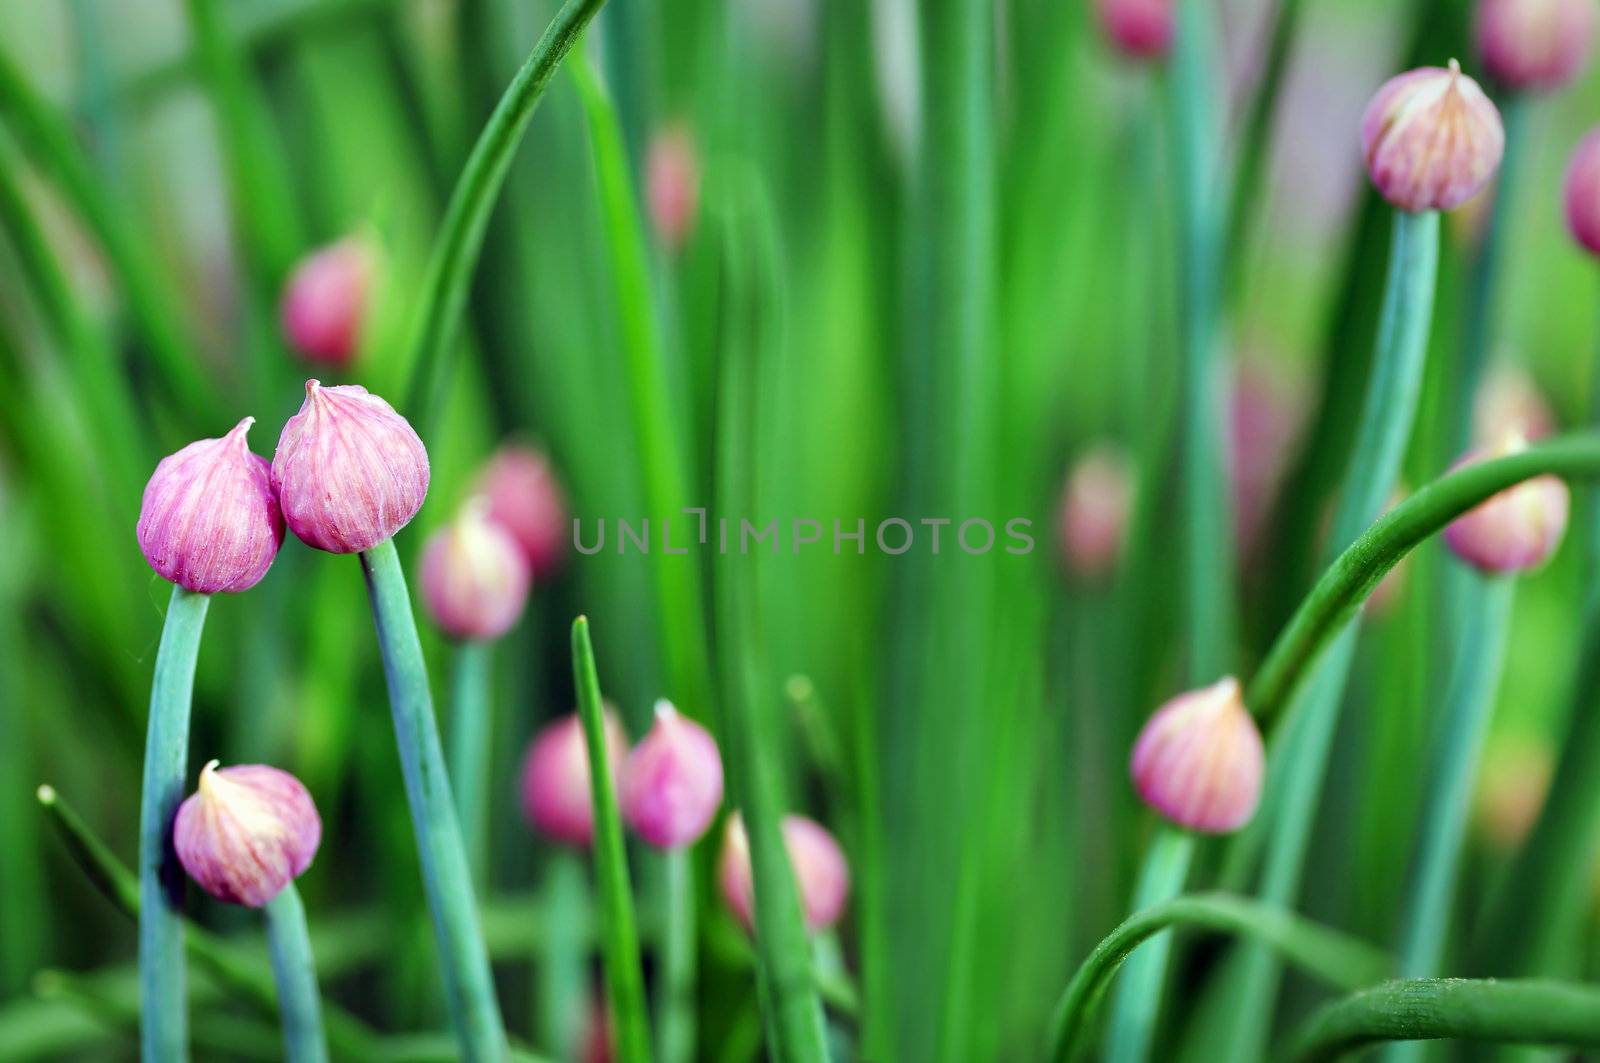 Onion or shallot flower buds by Mirage3